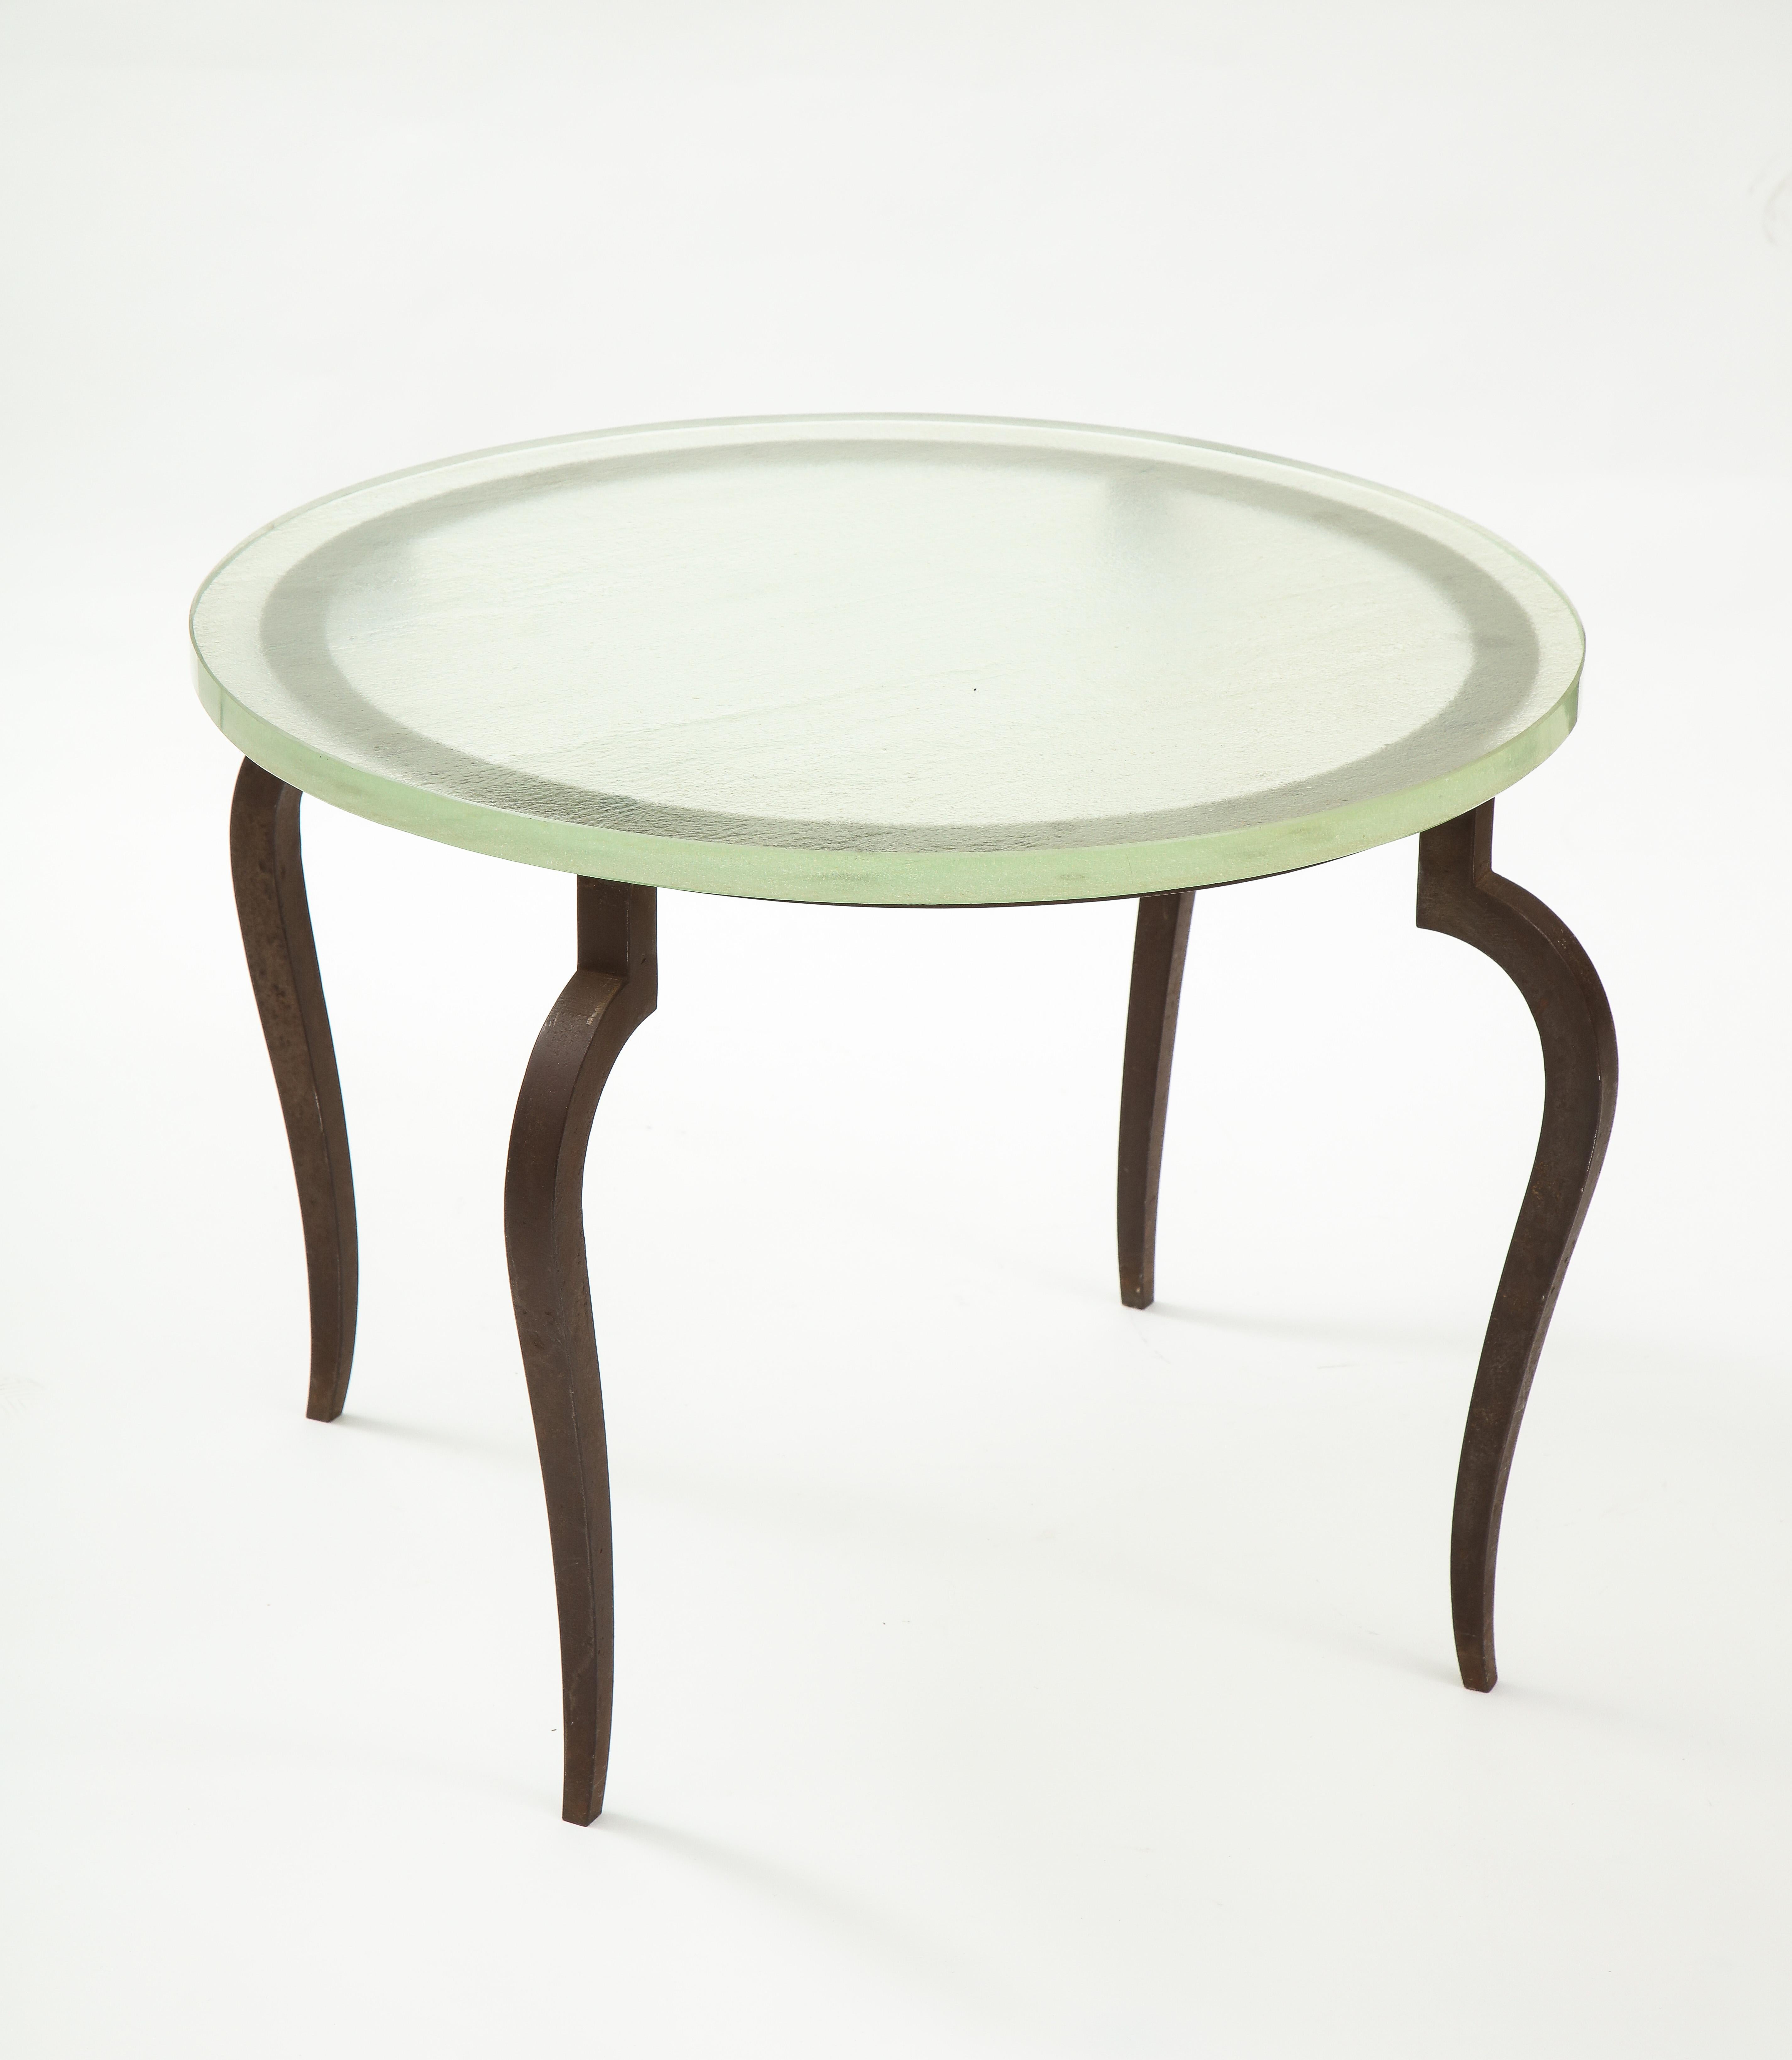 Mid-20th Century Saint Gobain Thick Glass Top Coffee Table with Bronze Legs, France, c. 1930